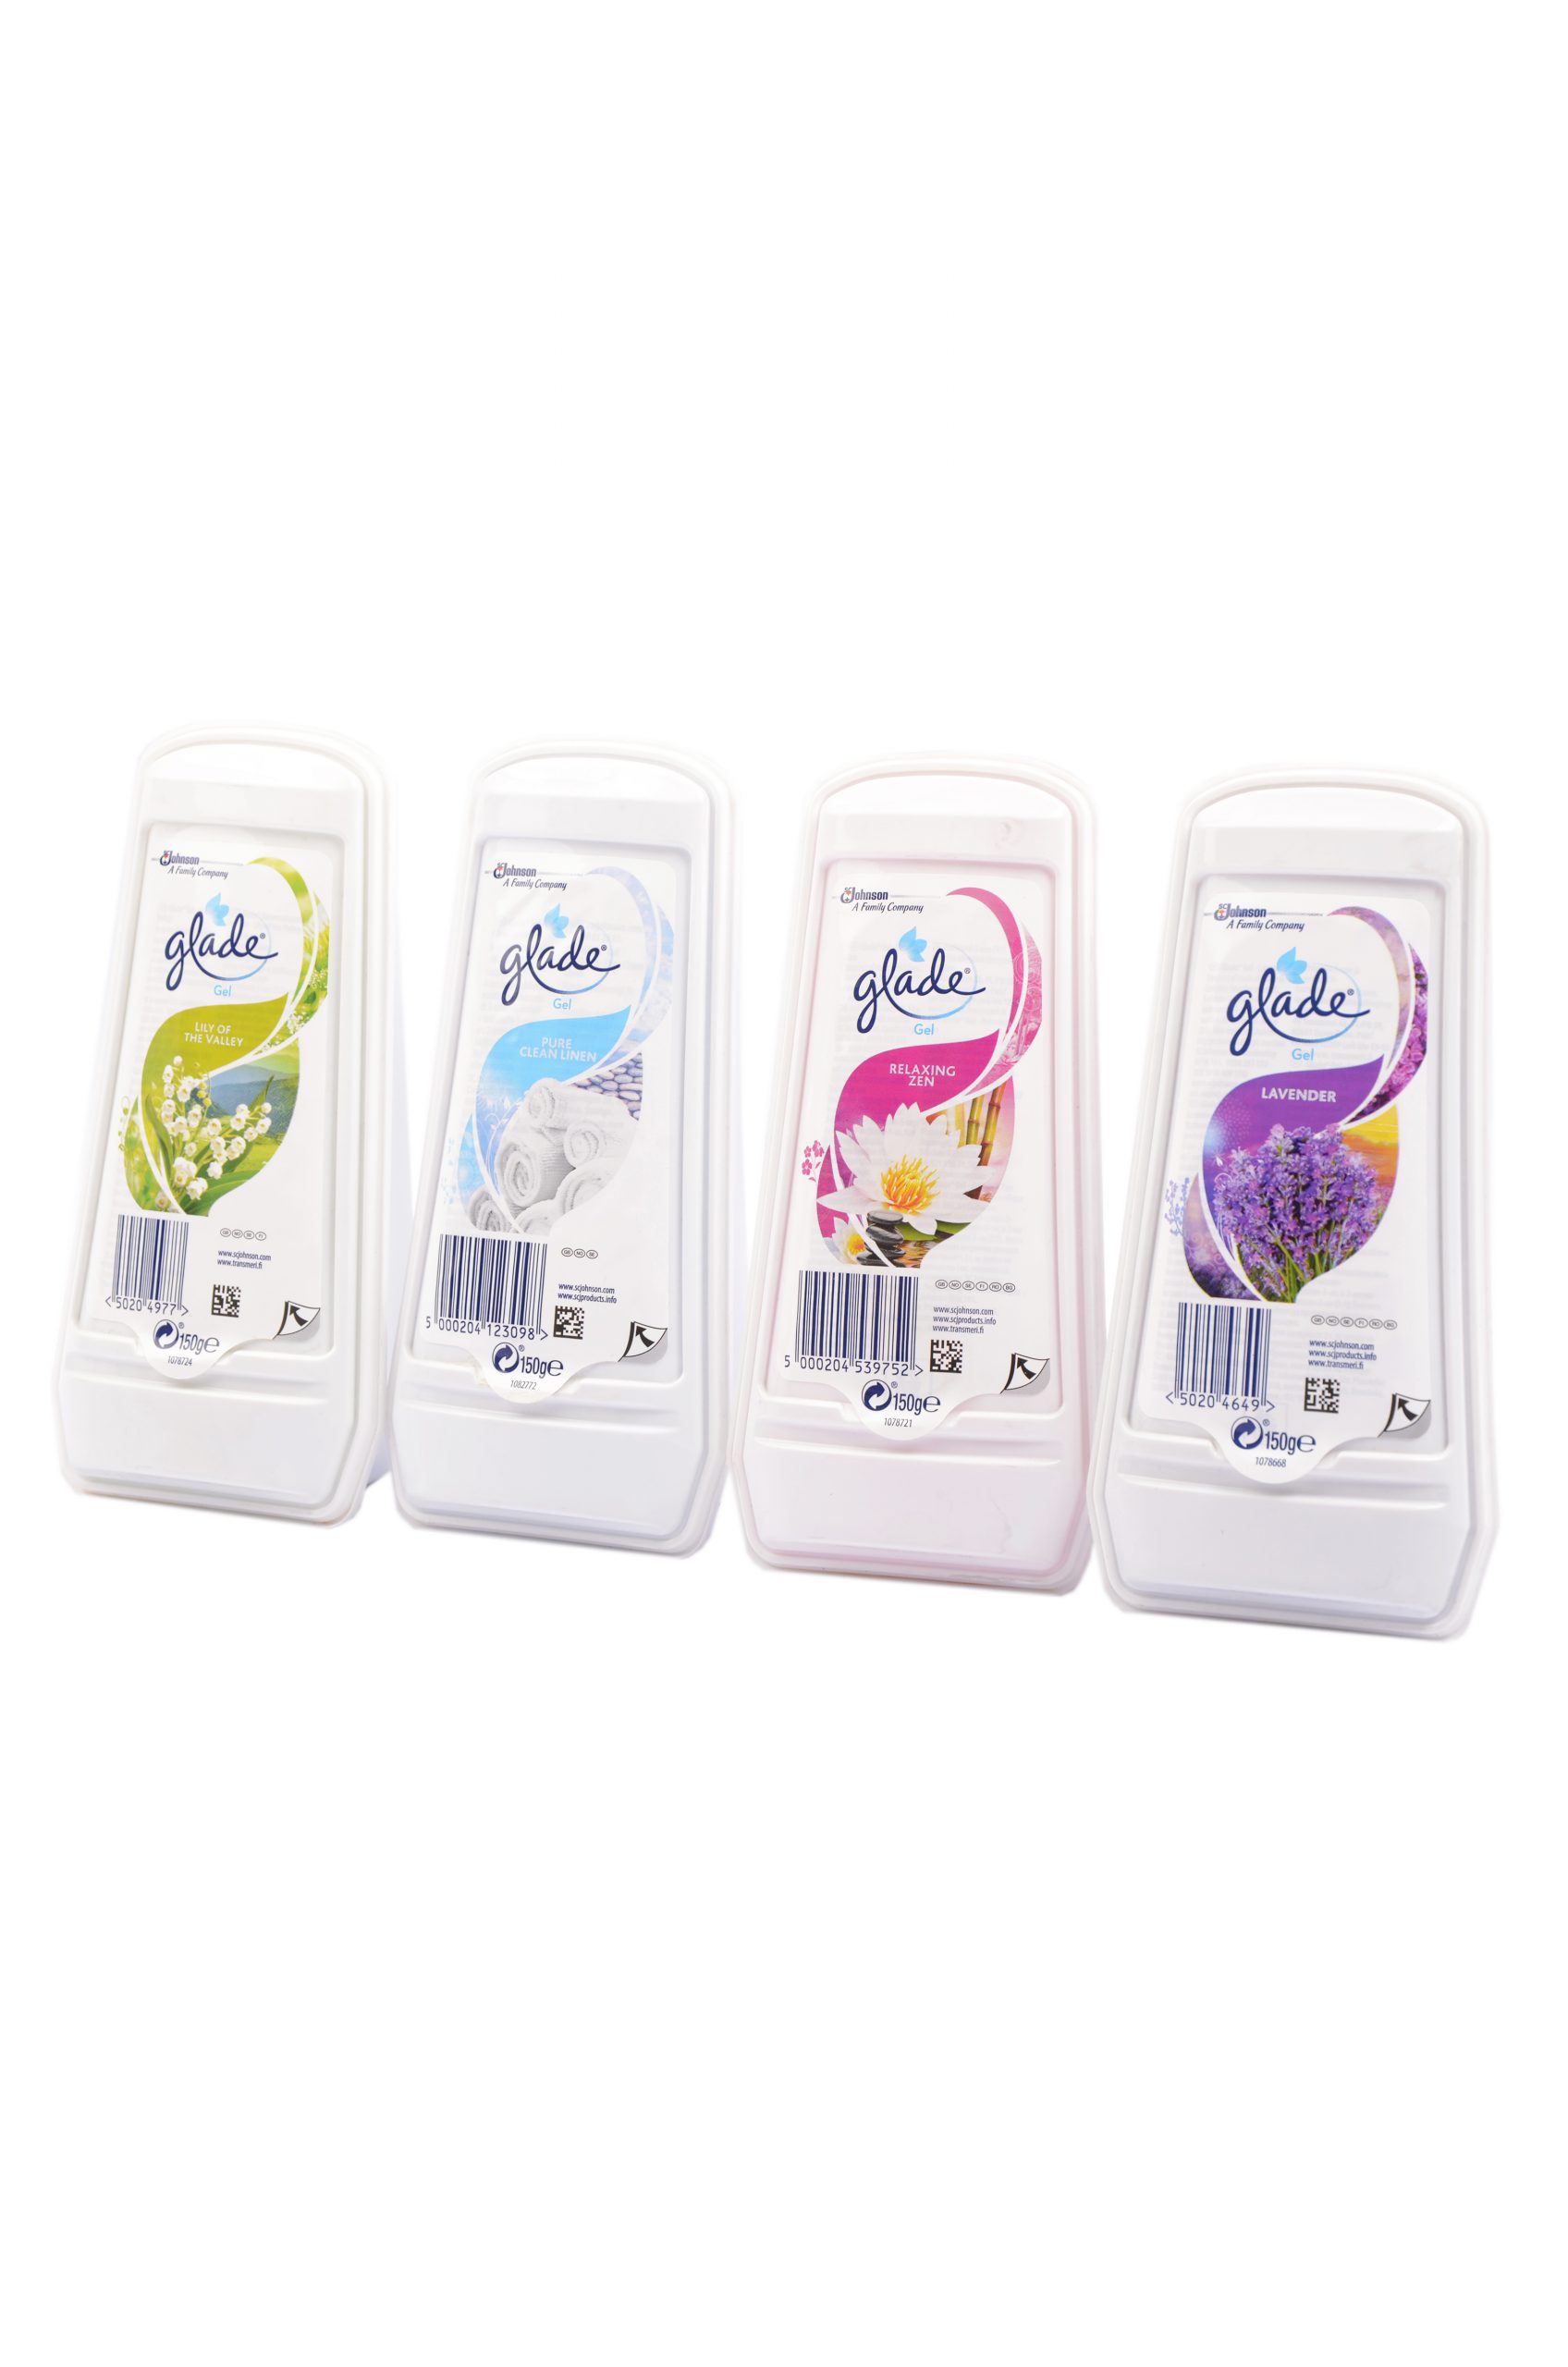 Glade 
	
	Air Freshener Gel
	 |  Detergents & Cleaners |  Cleaning Materials |  House Ware